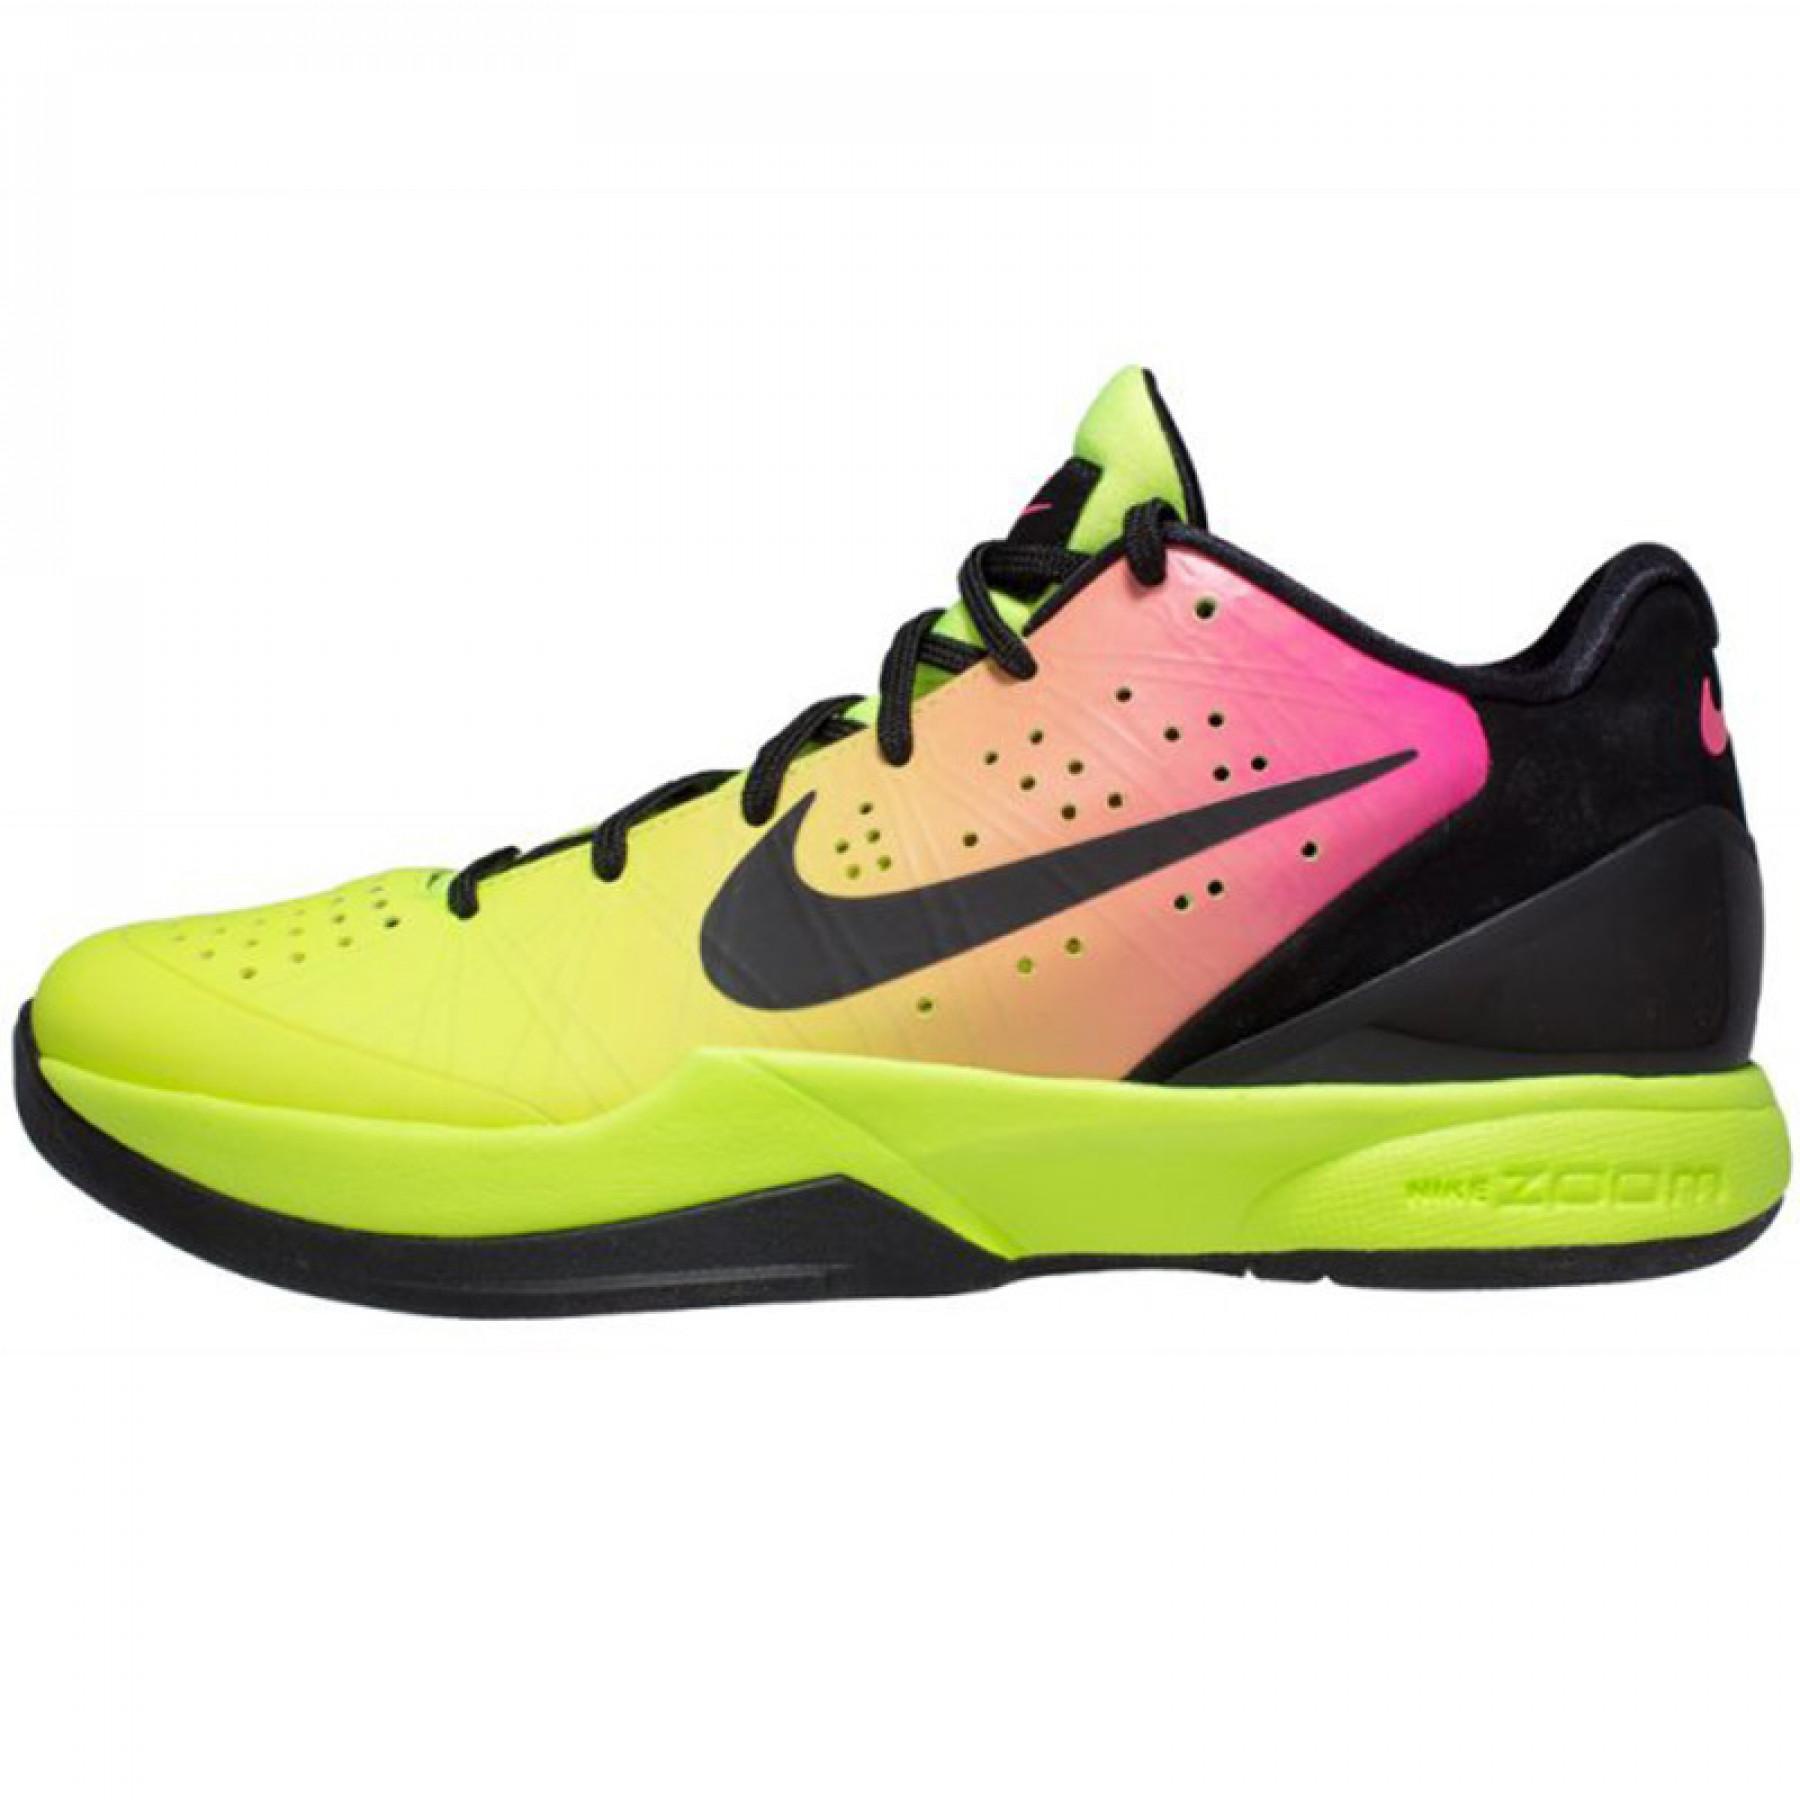 Nike Air Zoom HyperAttack Unlimited 